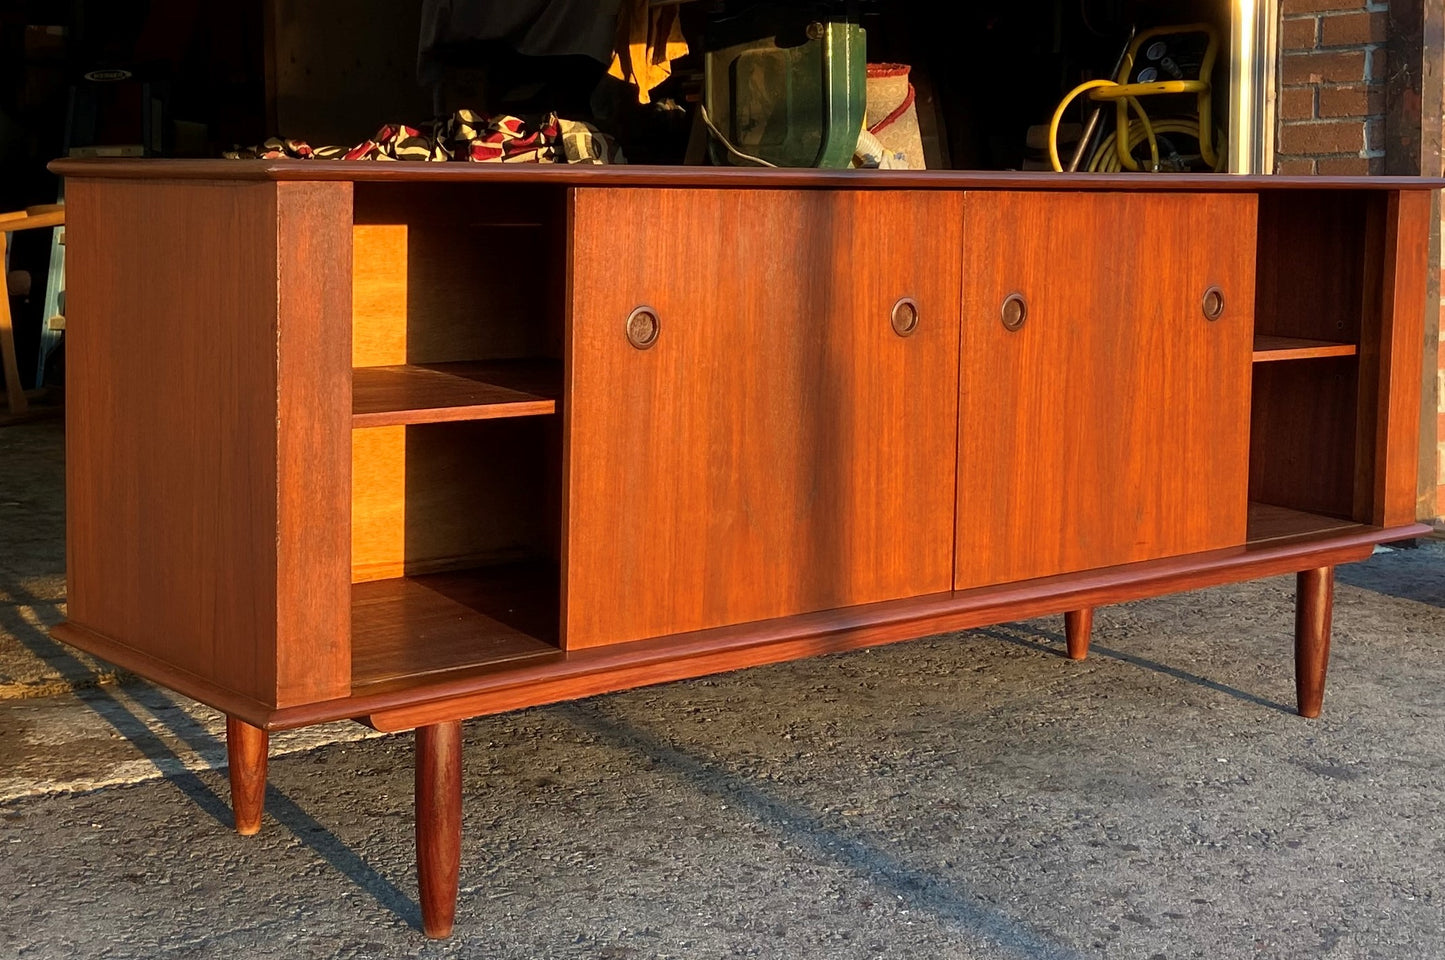 REFINISHED Mid Century Modern Teak Sideboard Buffet by Punch 6ft (not perfect)